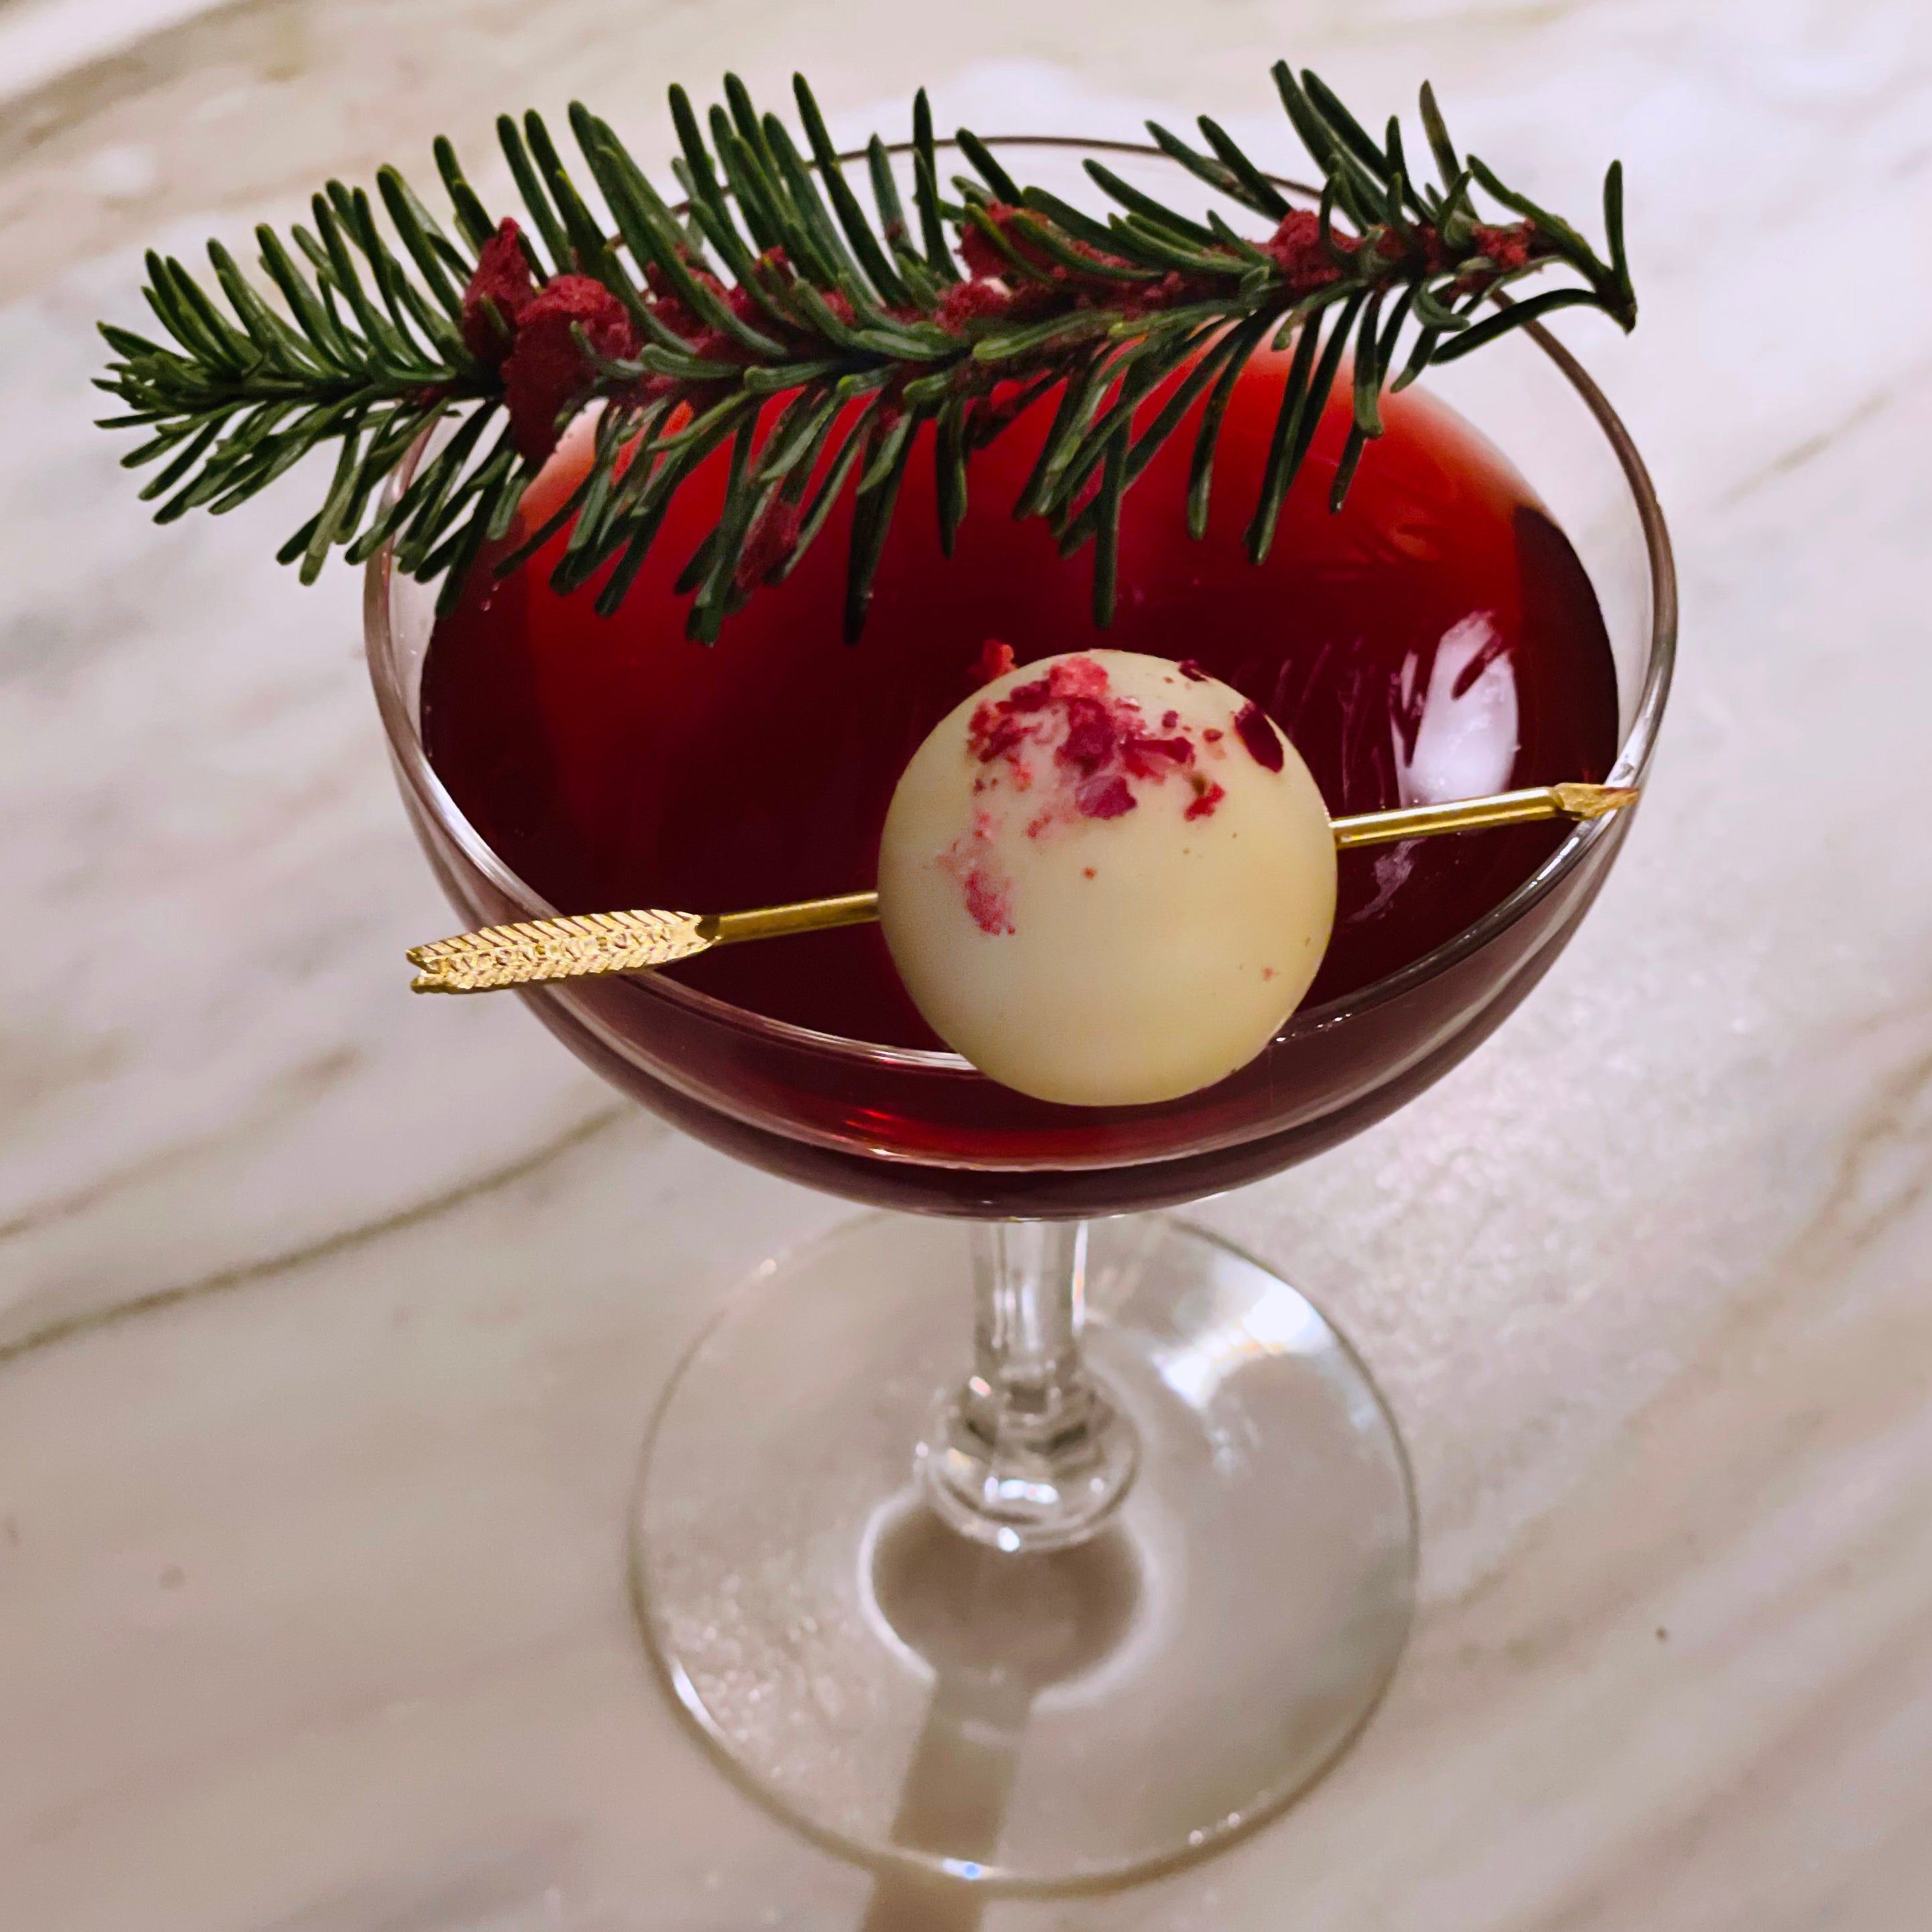 vosges-haut-chocolat-blog/koval-cranberry-pine-cosmo-the-star-truffle